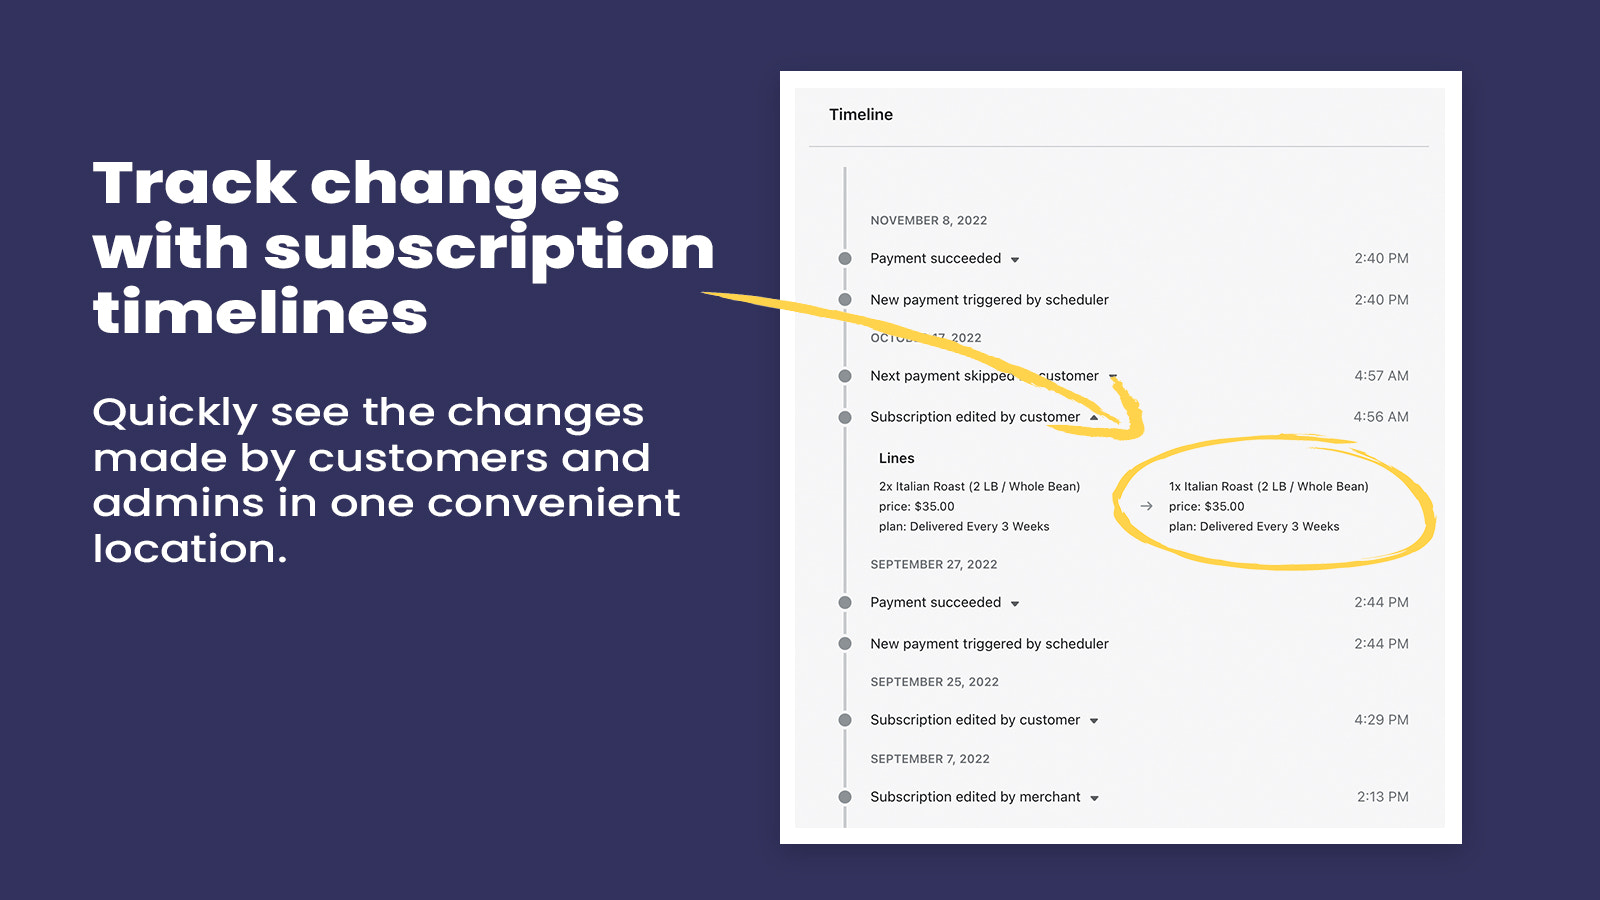 Track changes with a mobile optimized subscription timeline.